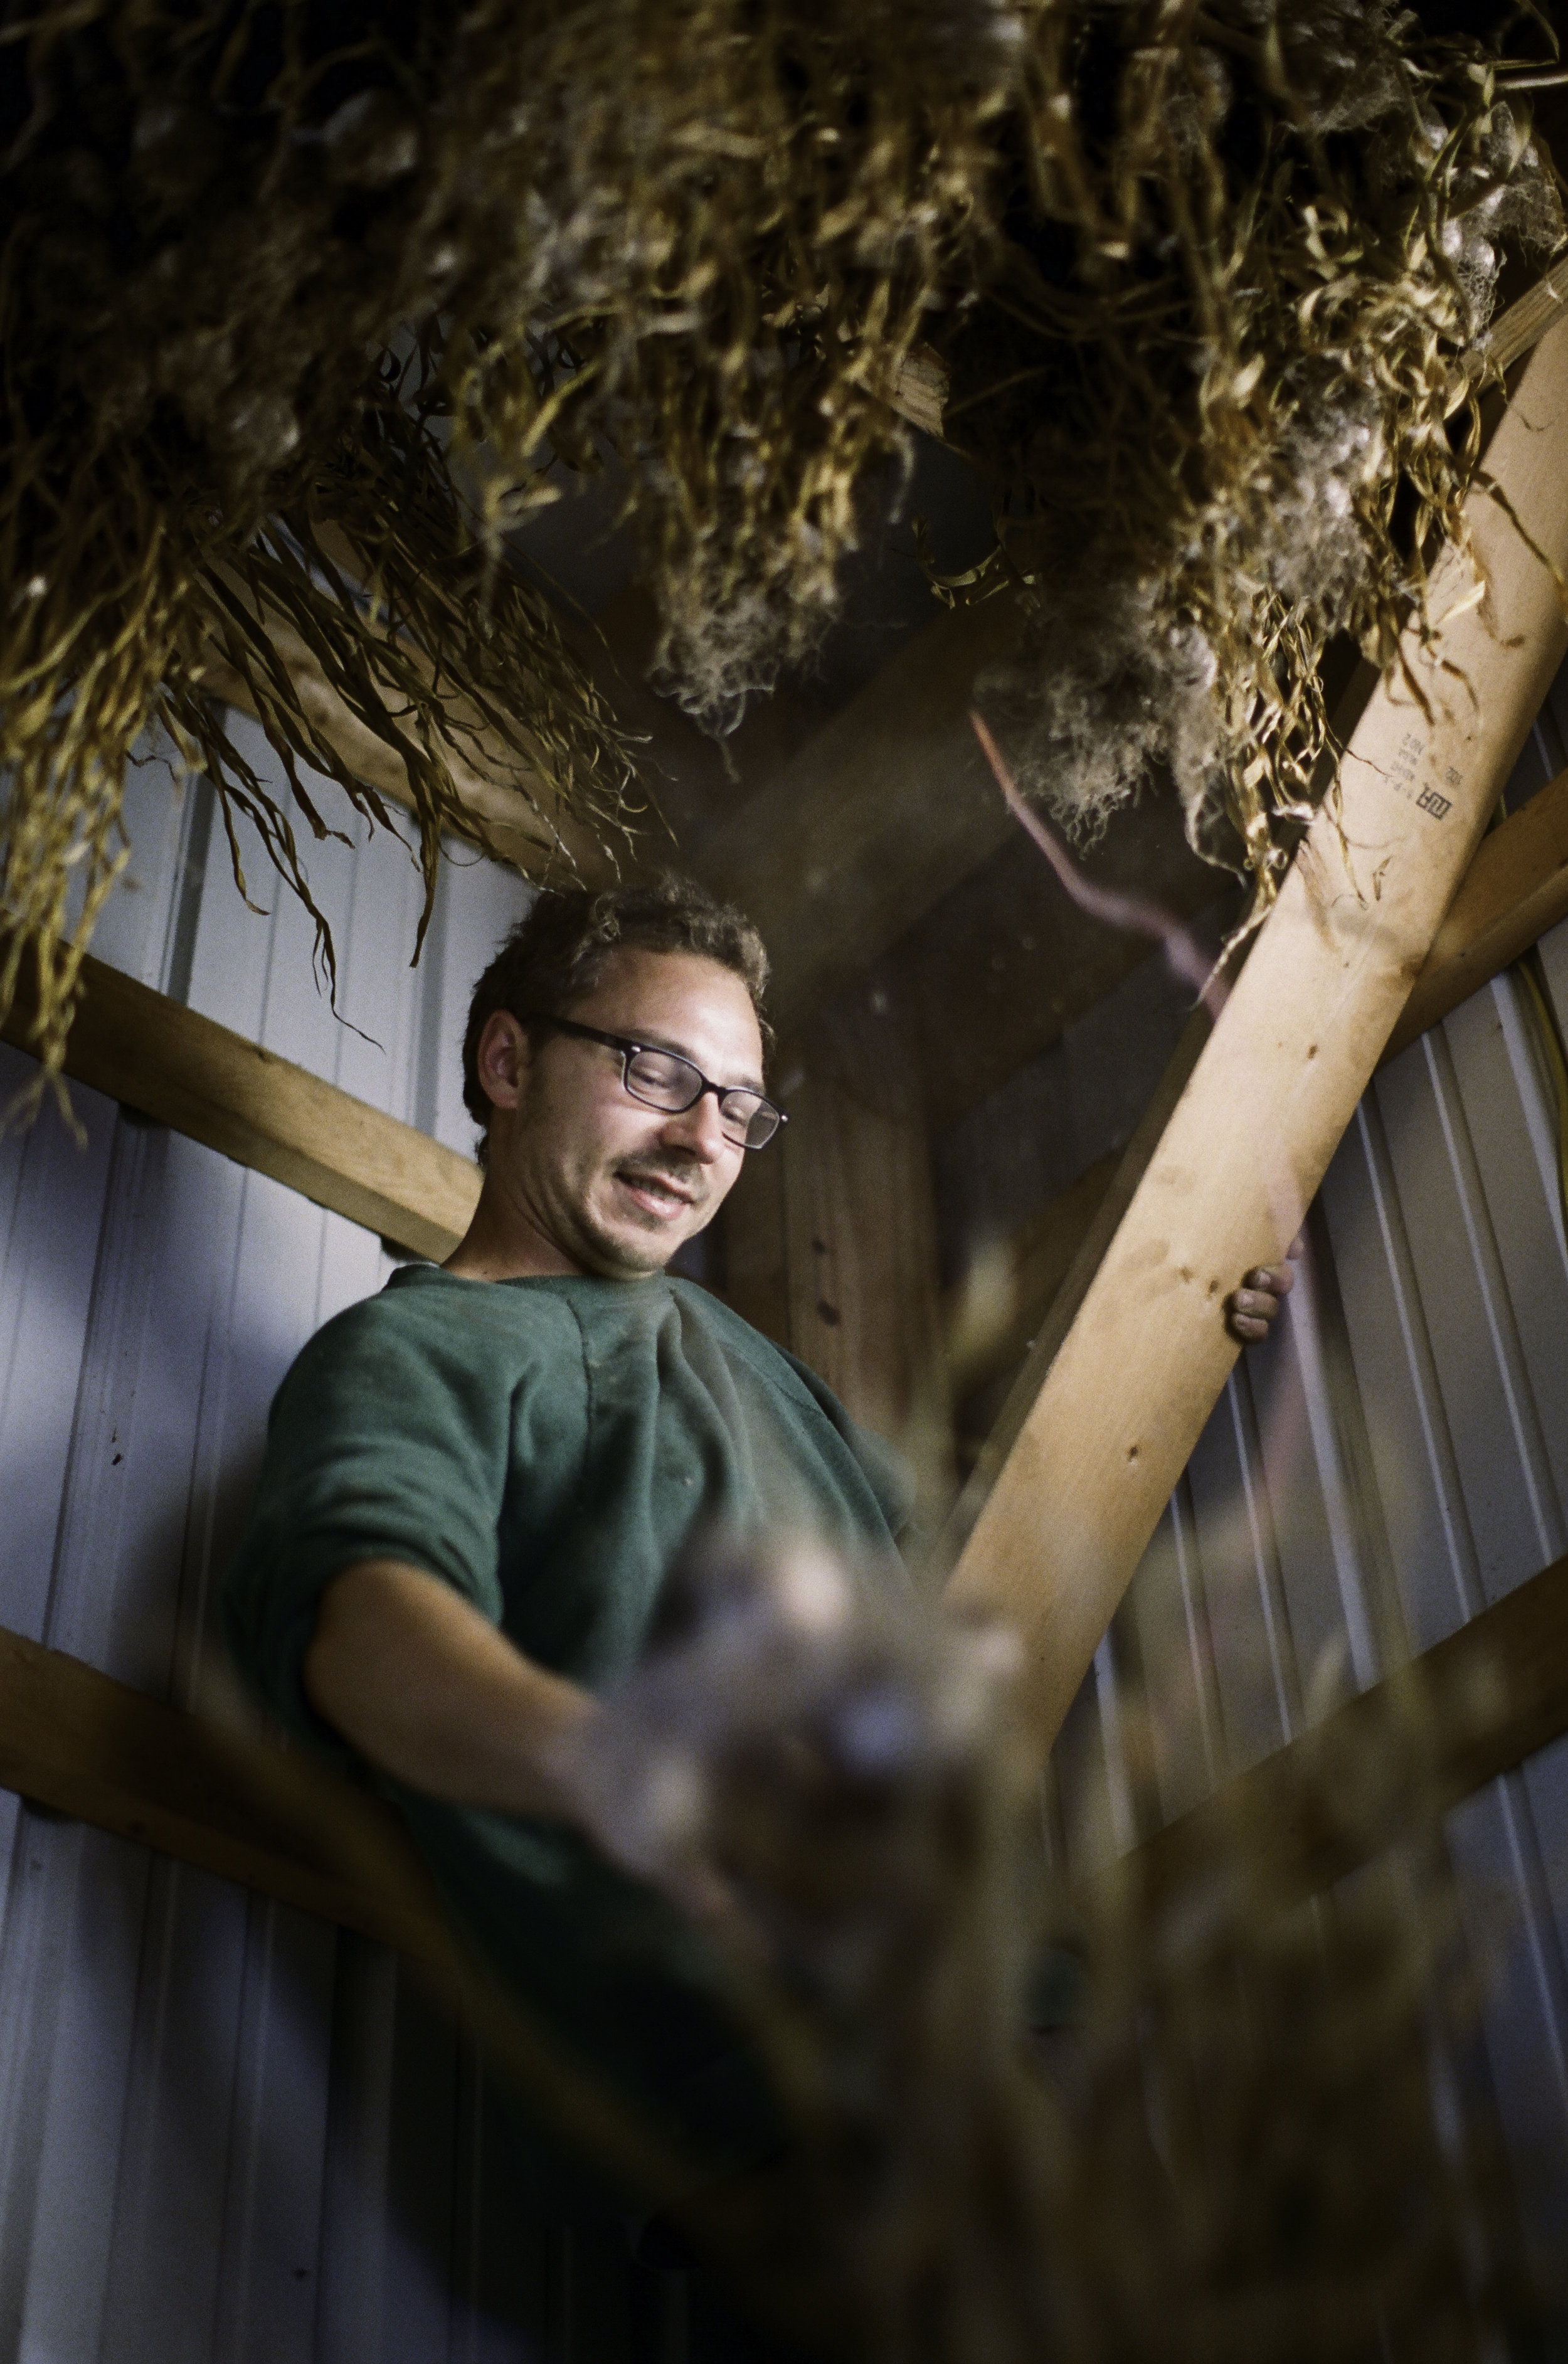  Scott Skrabal cutting down garlic from the rafters. He hopes to have his own one acre farm.&nbsp;"There seem to be a lot of younger people getting into farming but it’s definitely an old people’s game." According to the USDA, in 2012, the average ag